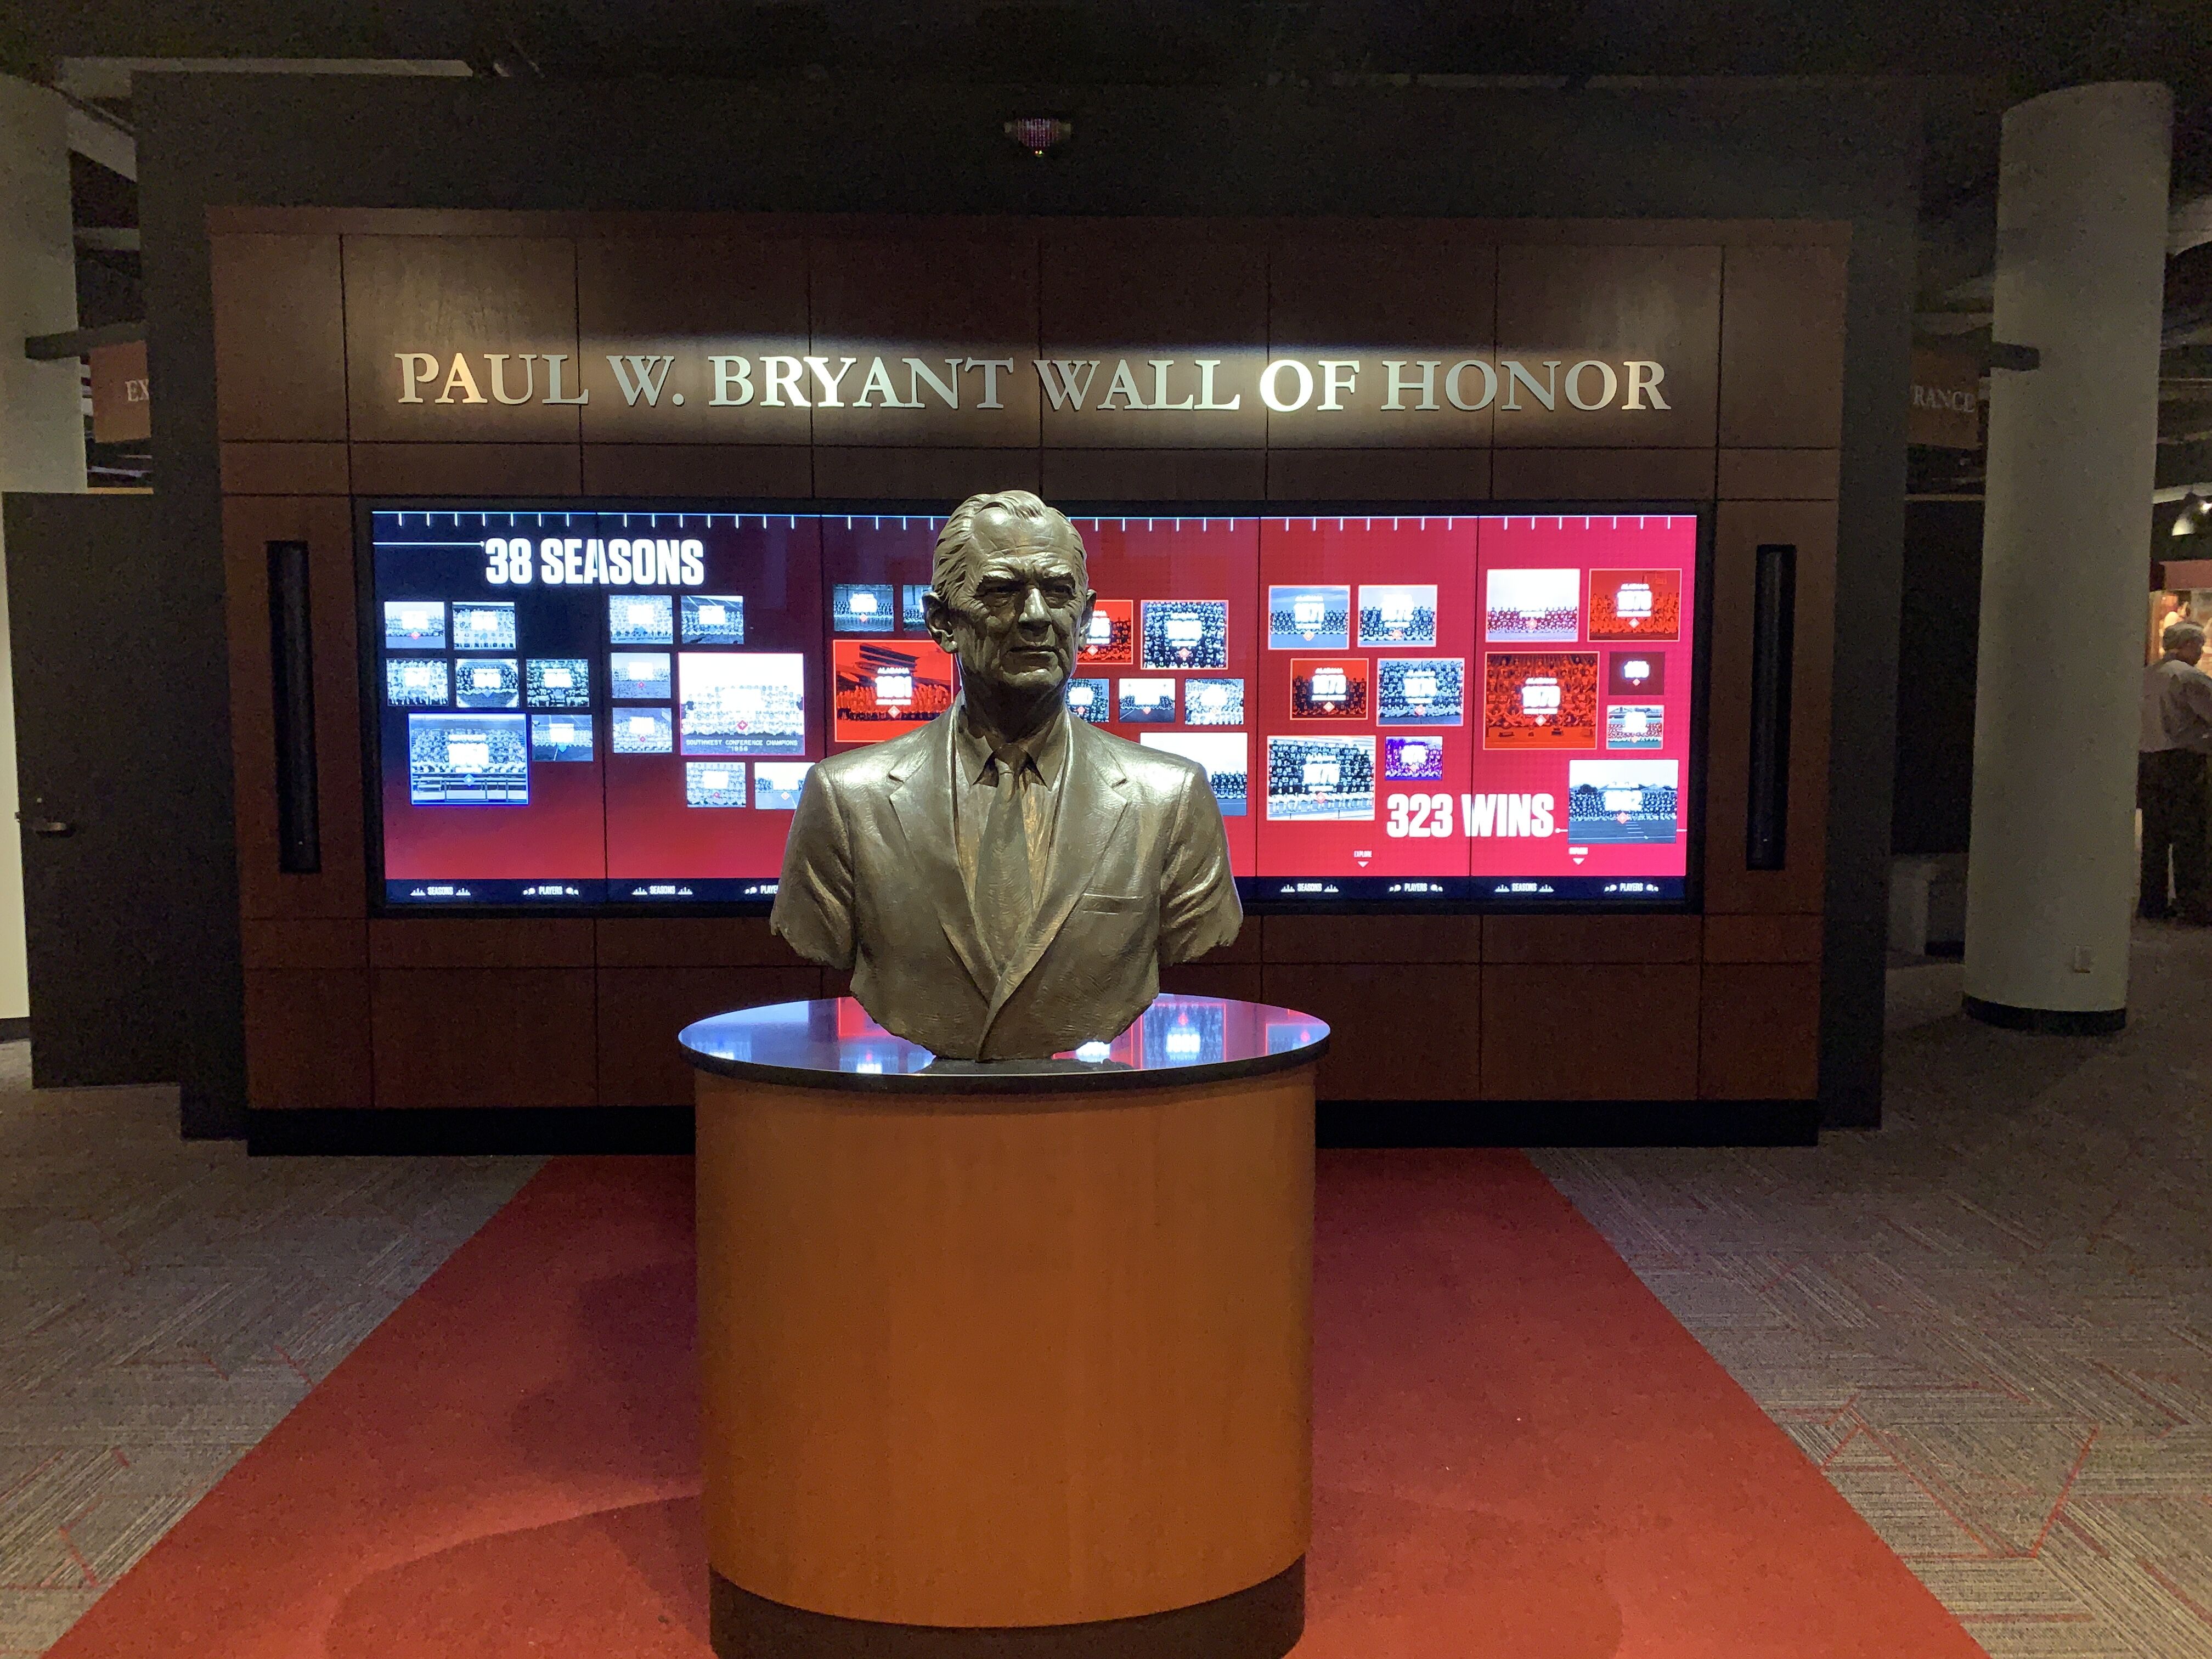 The Paul W Bryant Wall of Honor